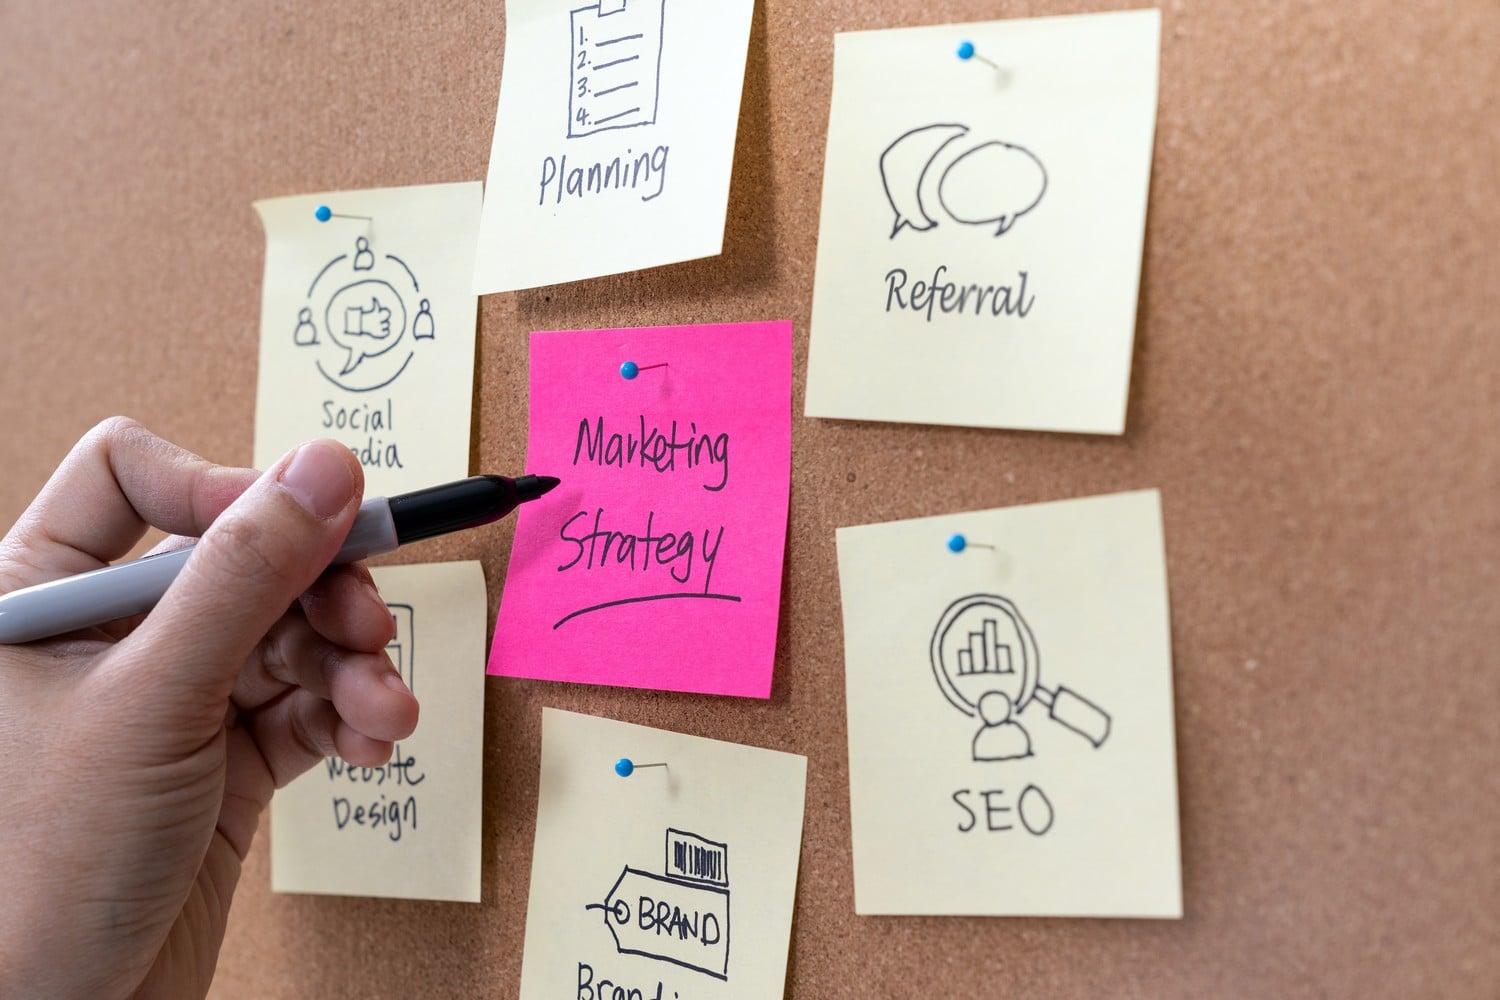 From Planning to Executing The Power of Local SEO